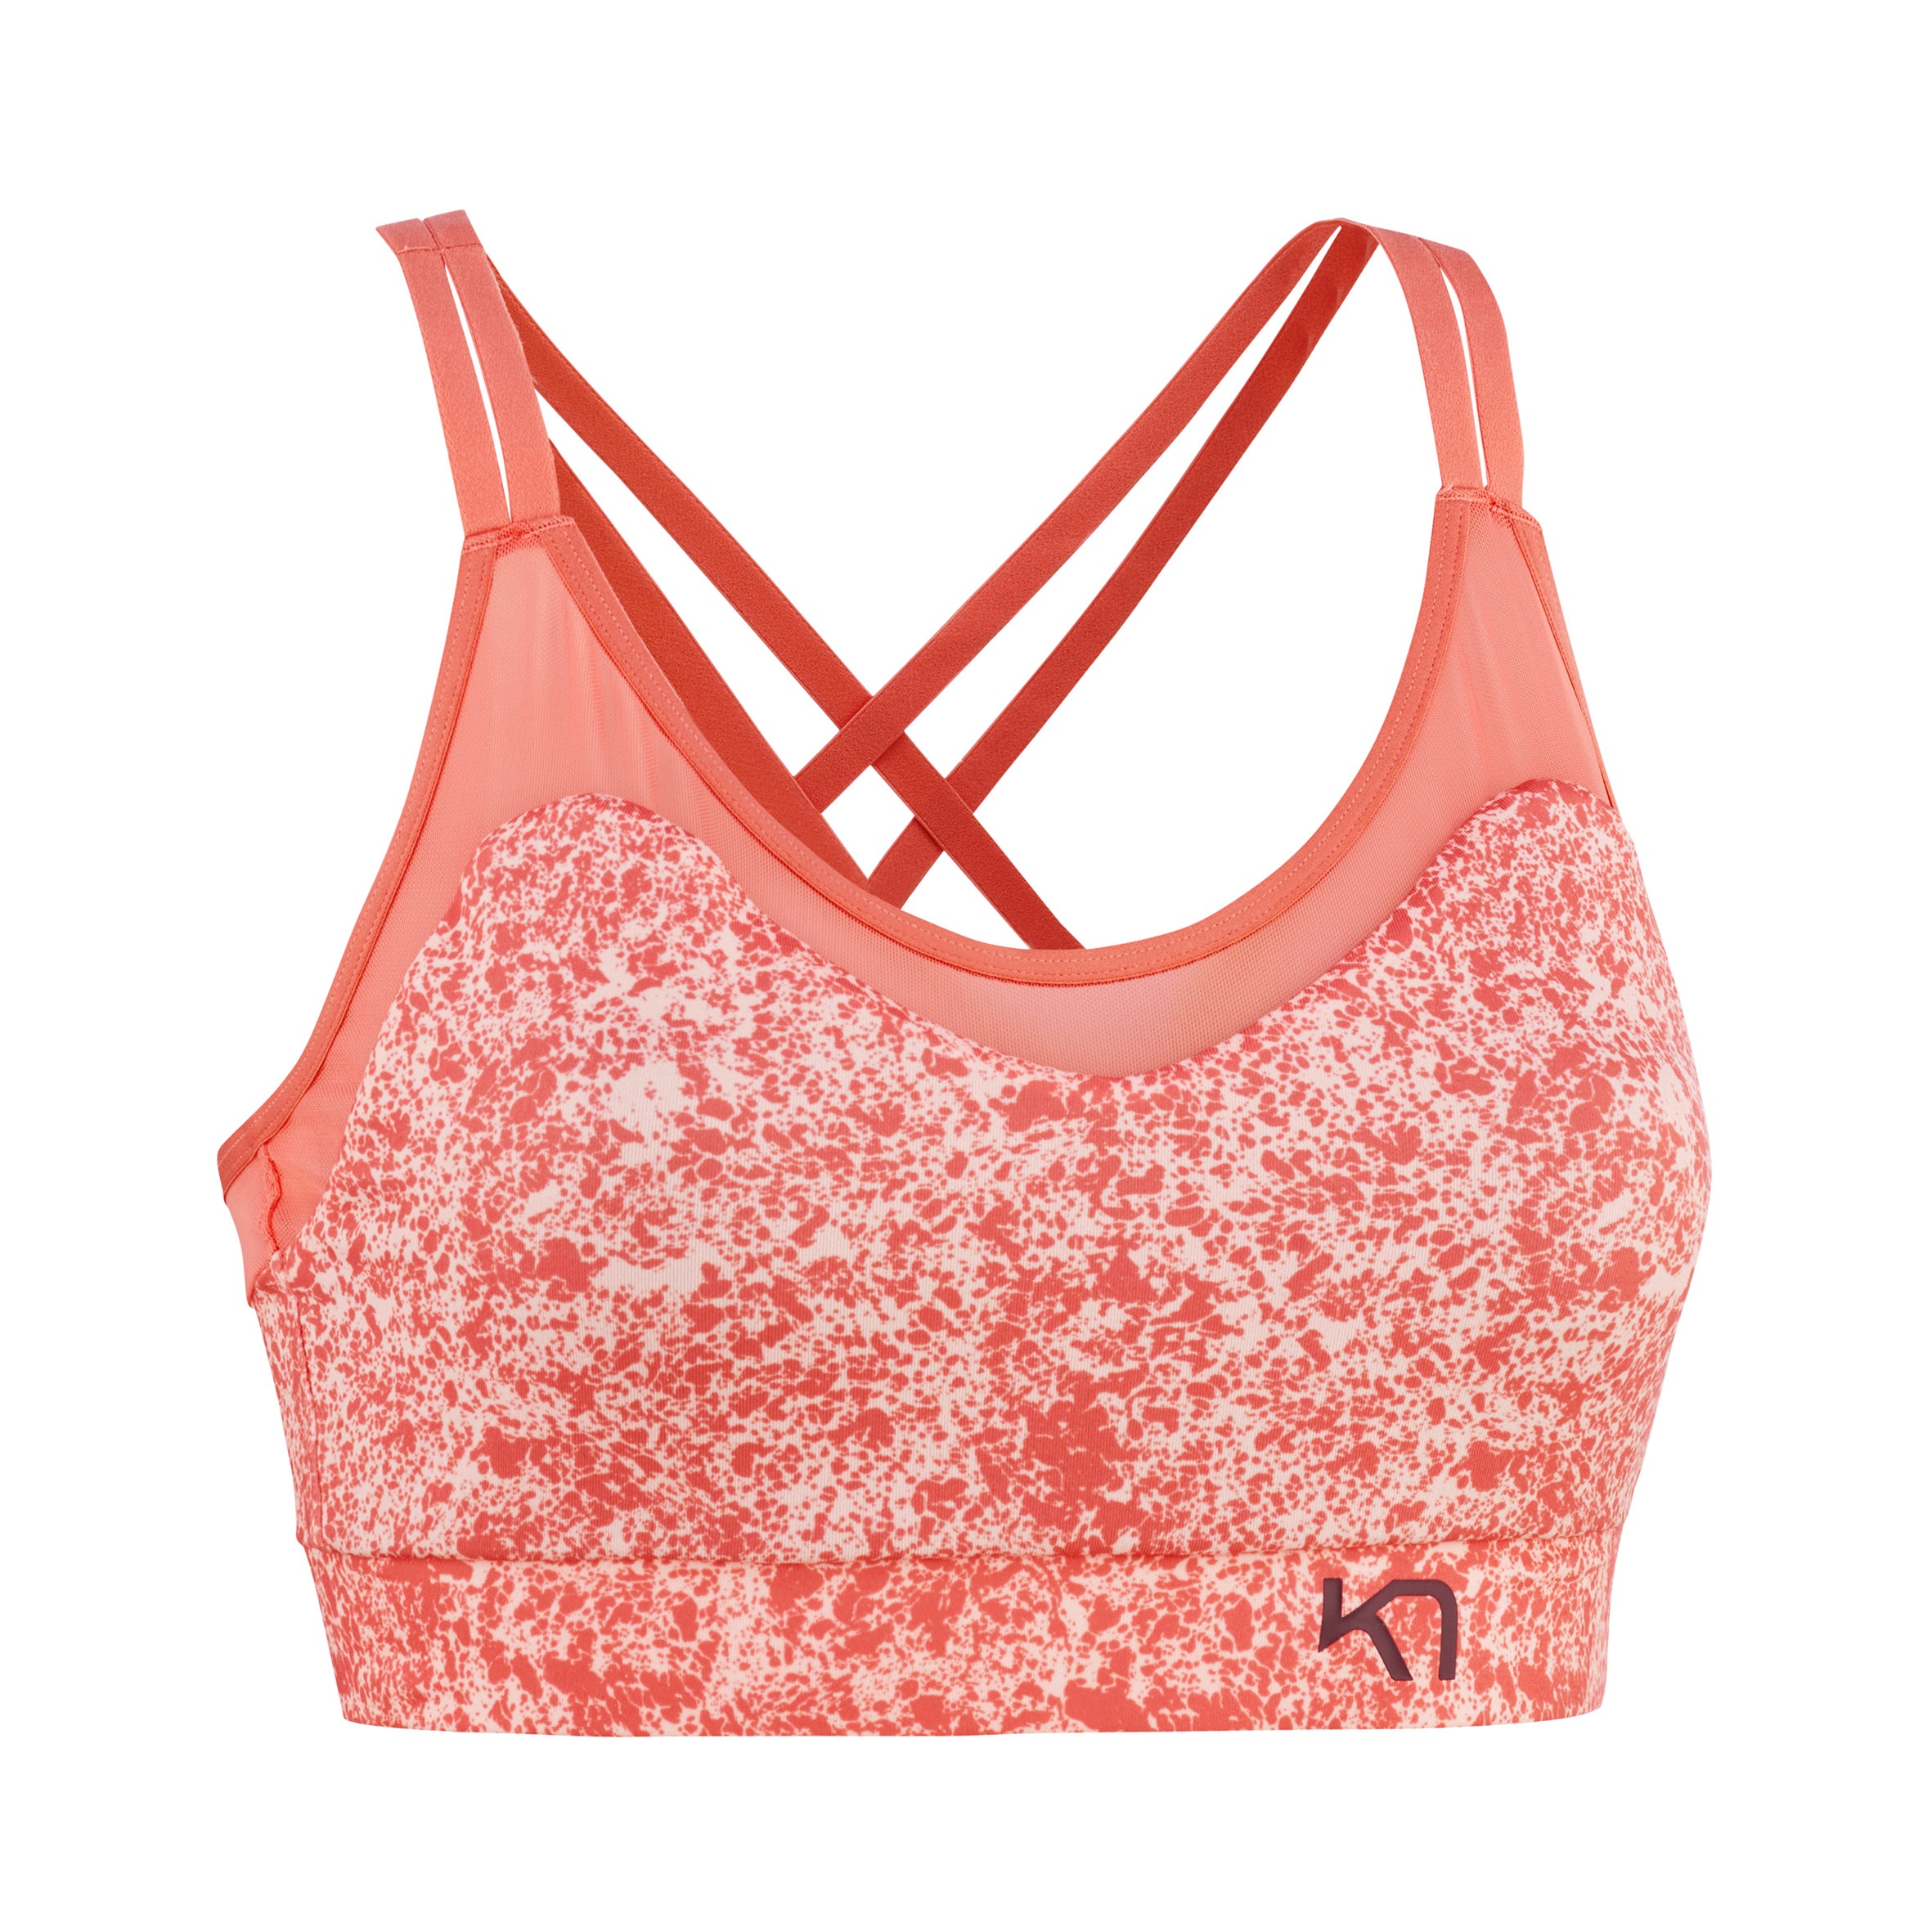 Sports Bra hack - how we changed the Kerri to have the best of all